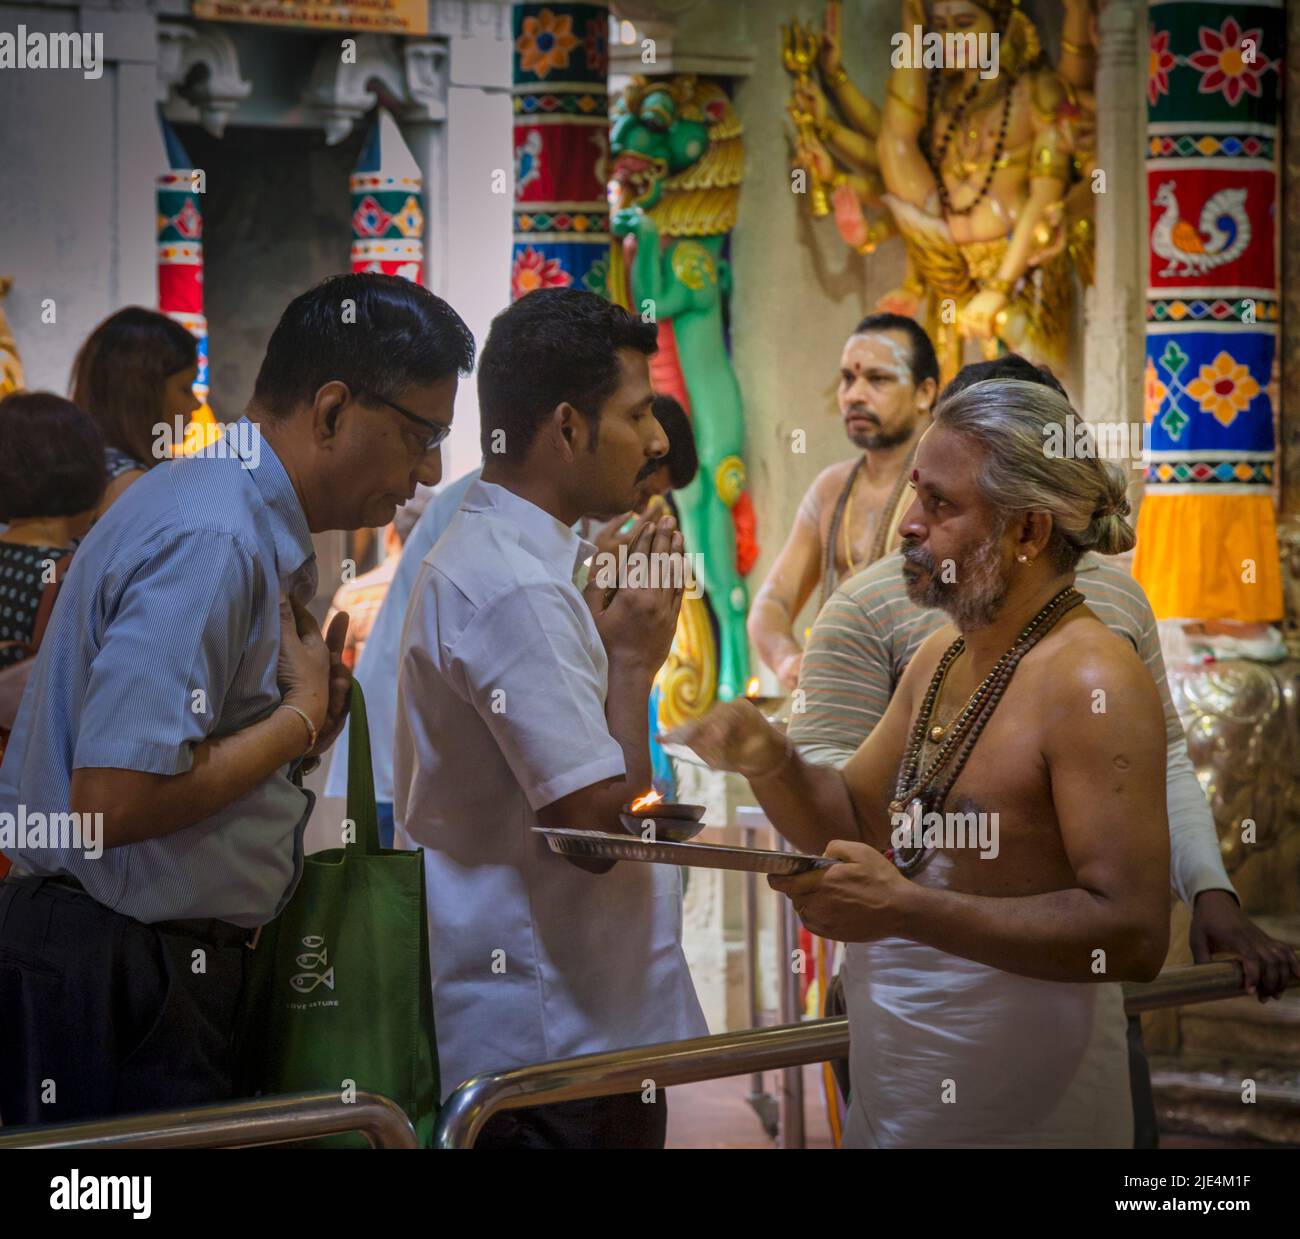 A priest and worshippers in the Sri Veeramakaliamman Temple, Serangoon Road, Little India, Republic of Singapore.  This Hindu temple is one of the old Stock Photo